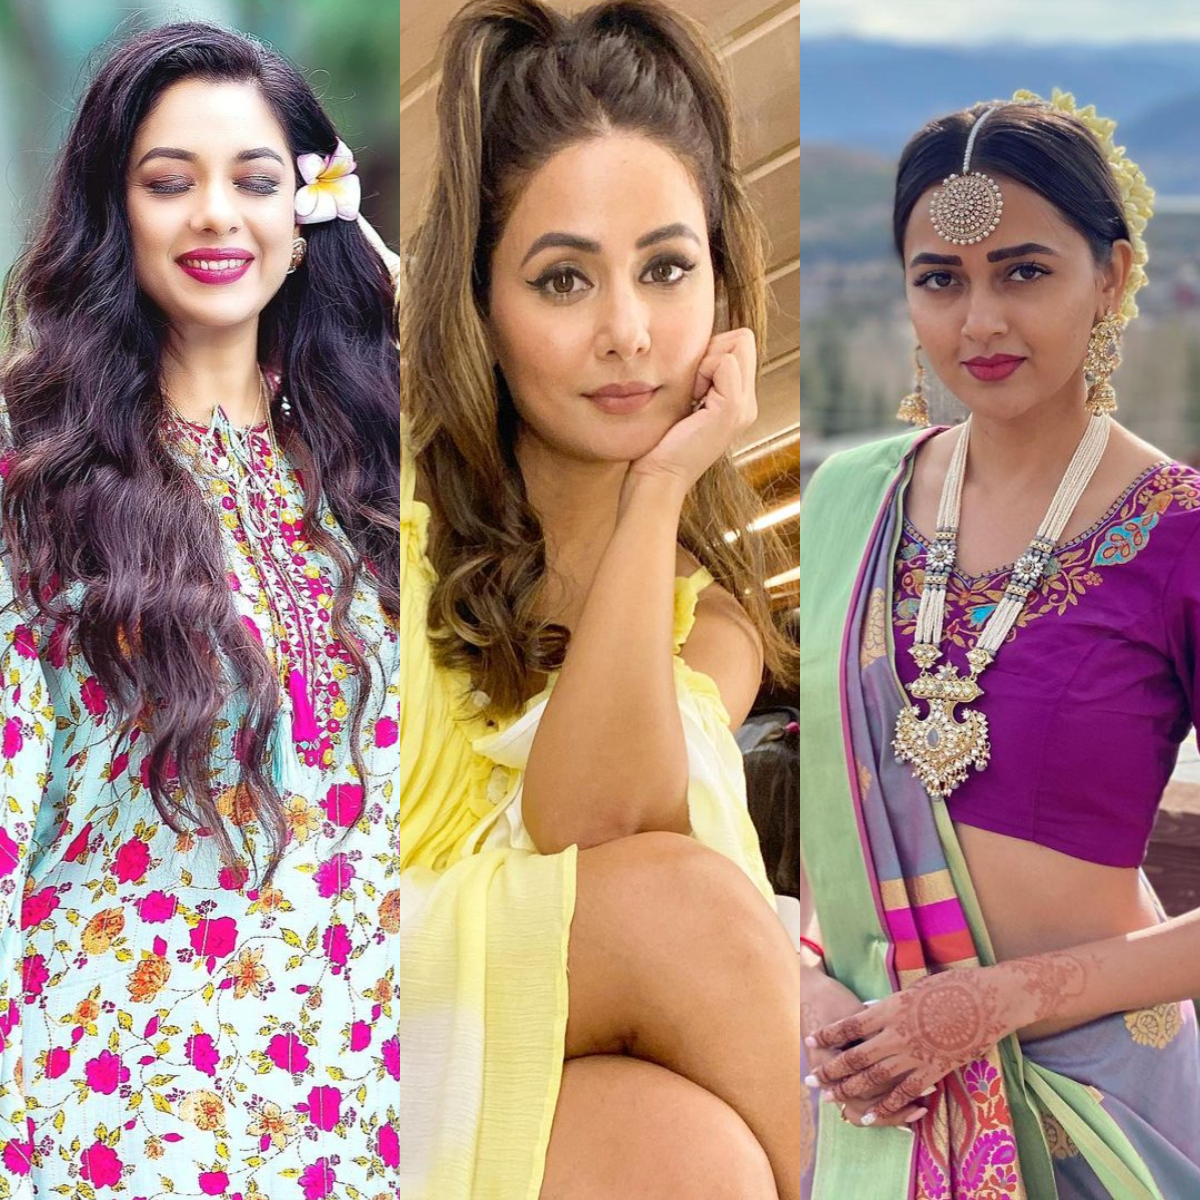 Indian TV Actress: 20 popular and beautiful heroines who rule the TV serial industry - Names, pics & bio